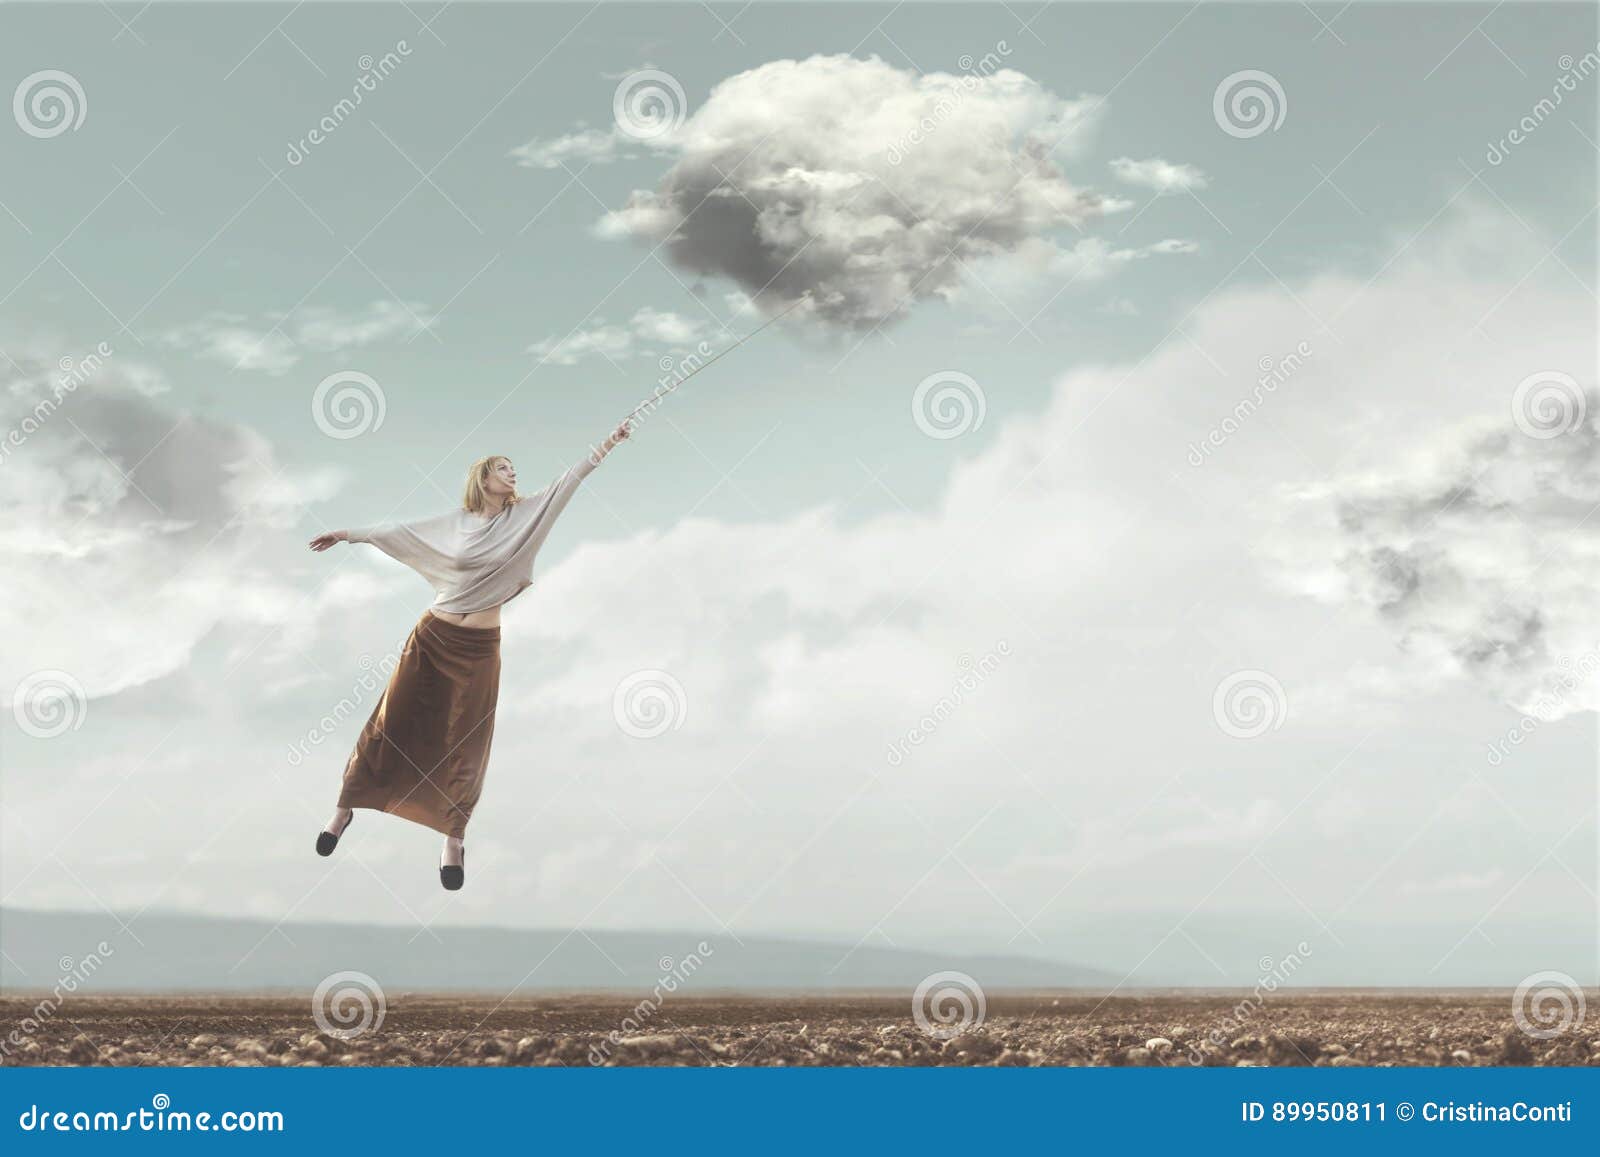 woman flying in the sky carried by a cloud